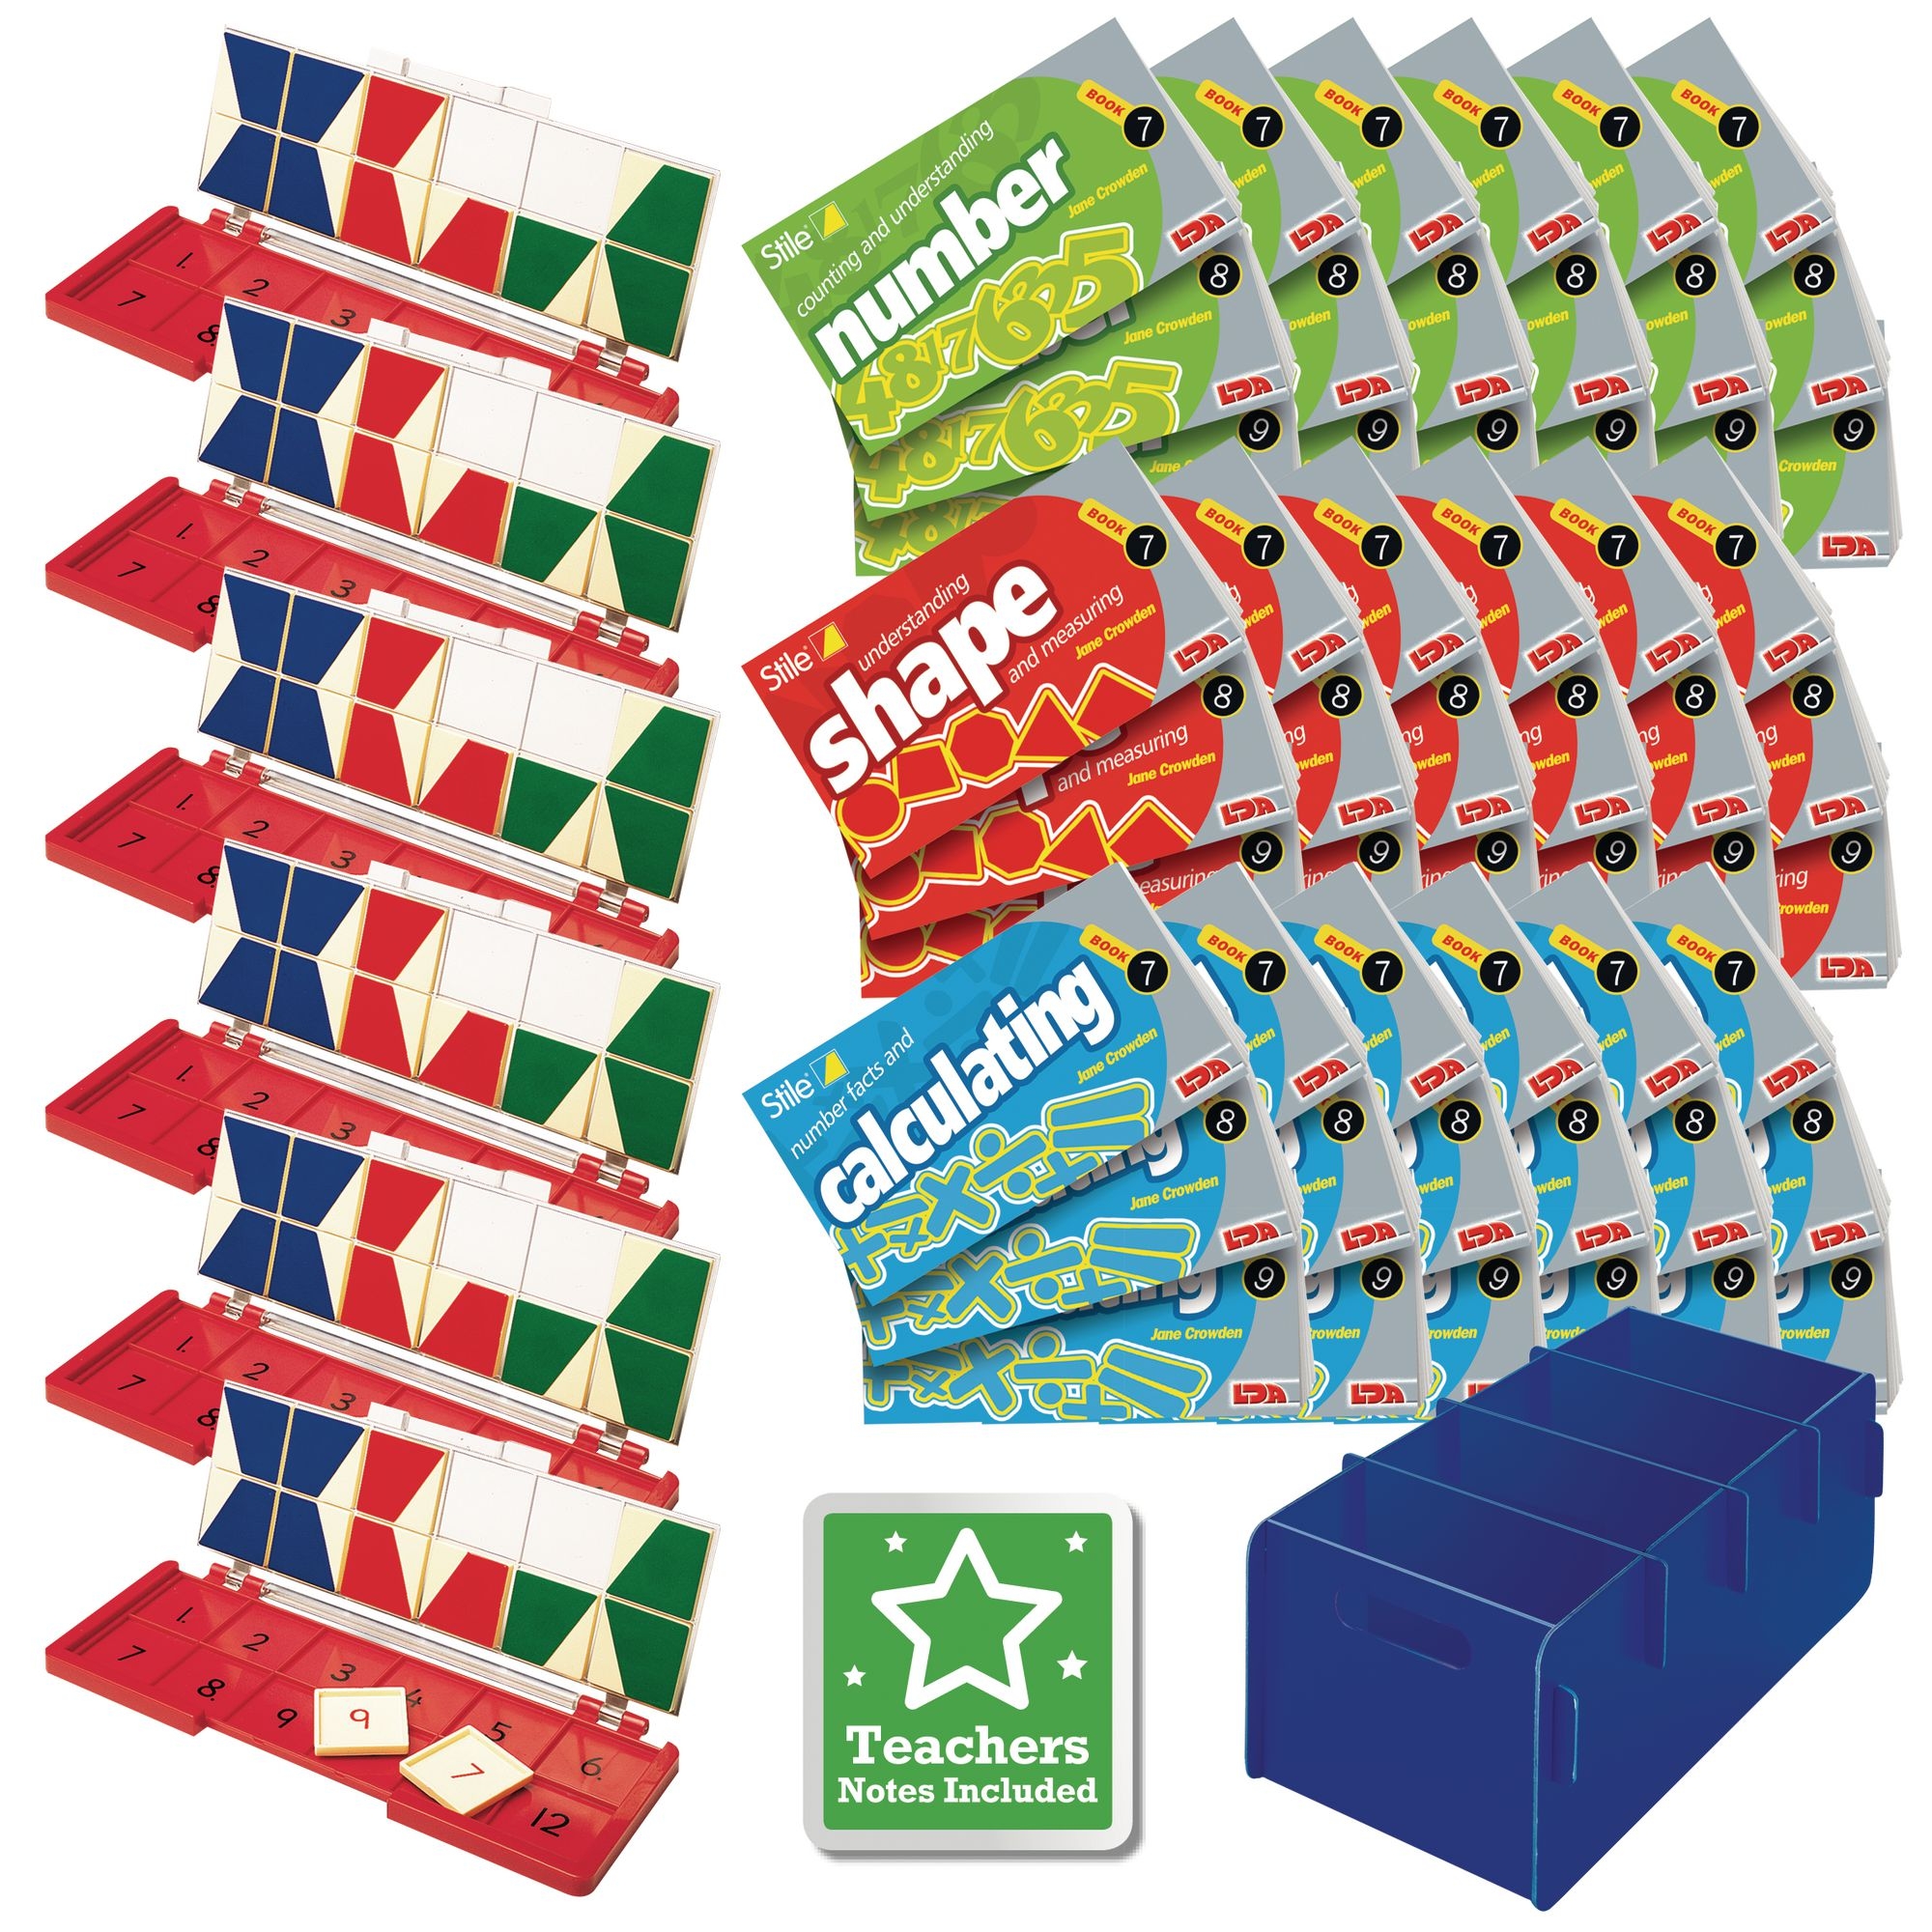 Stile Year 5/P6 Pack - Age 9-10 - Multipack